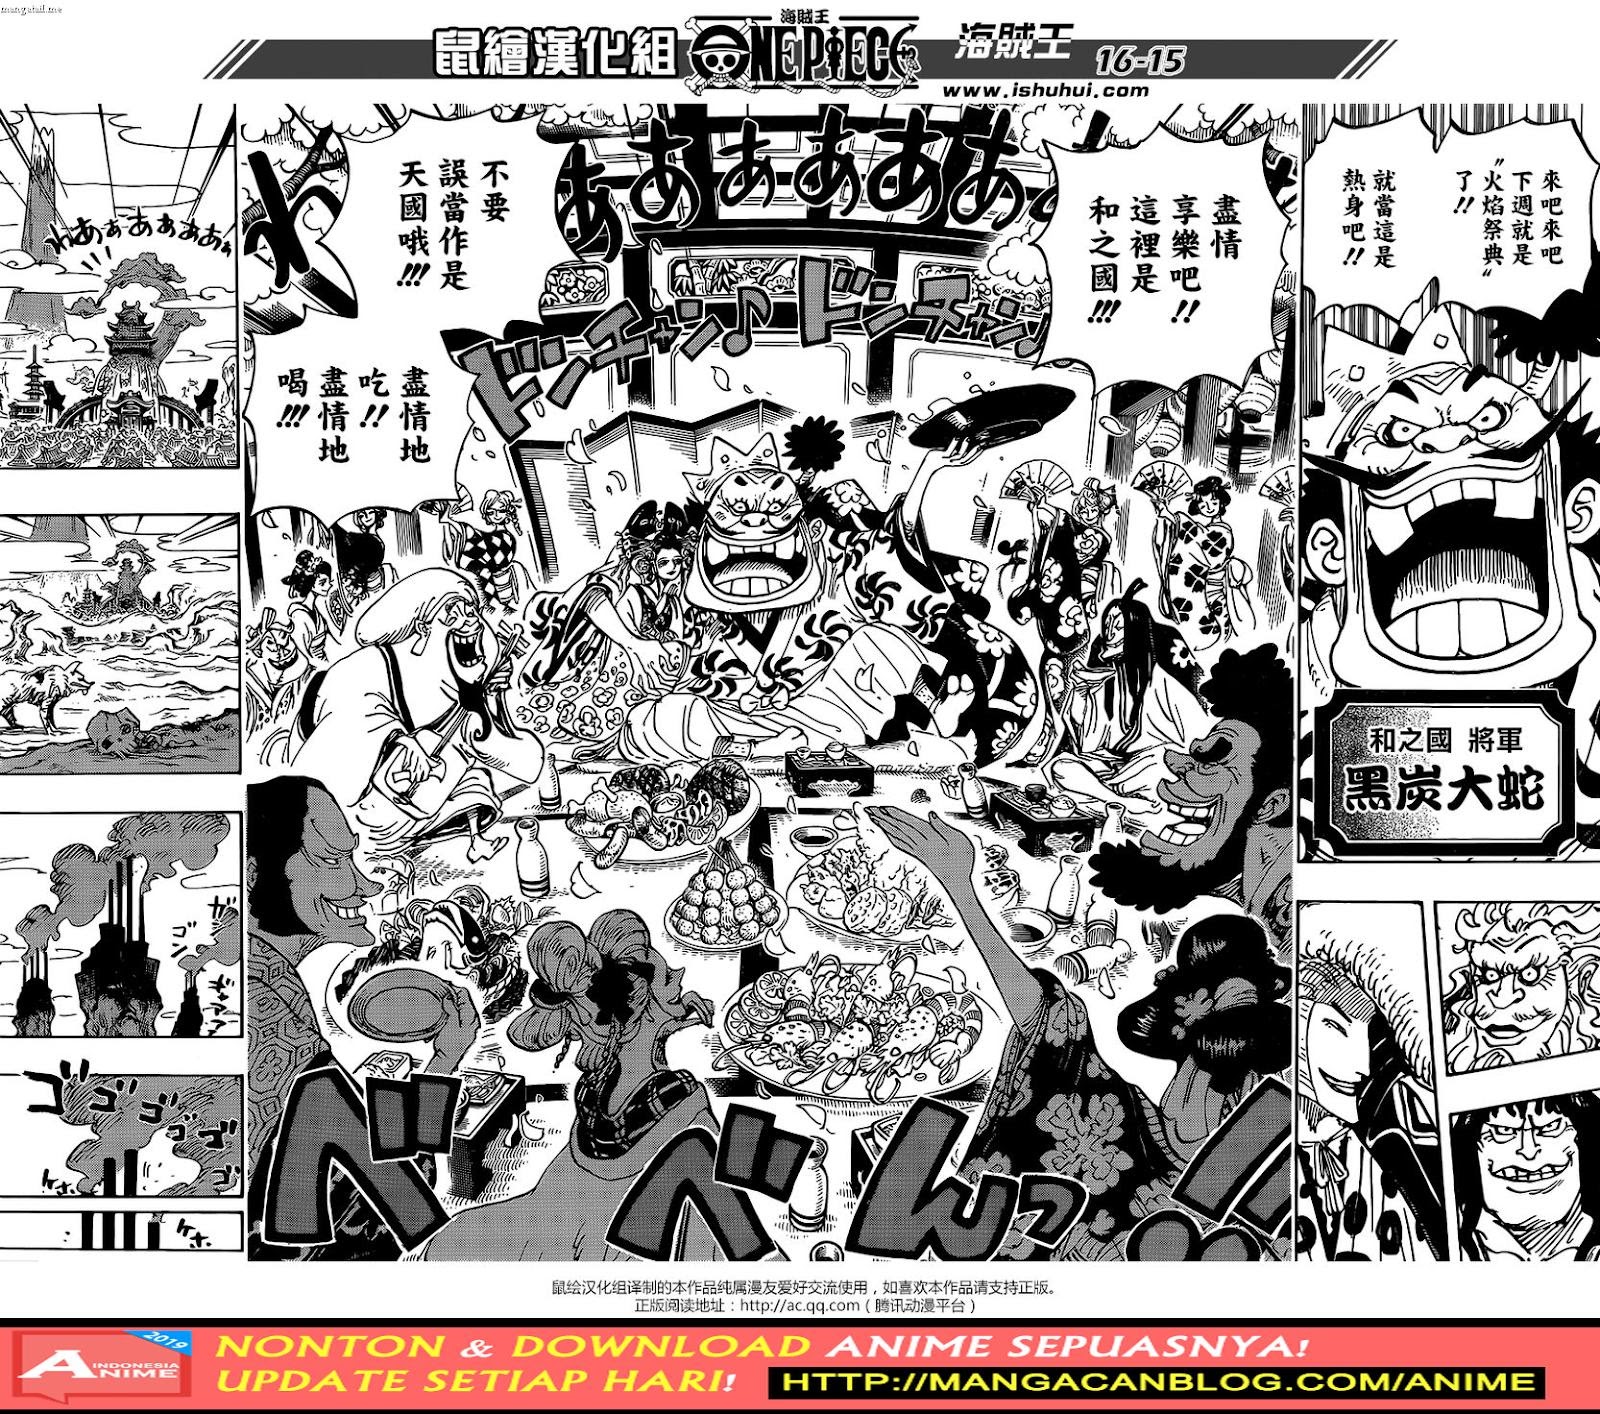 One Piece Chapter 928 – Raw - 117